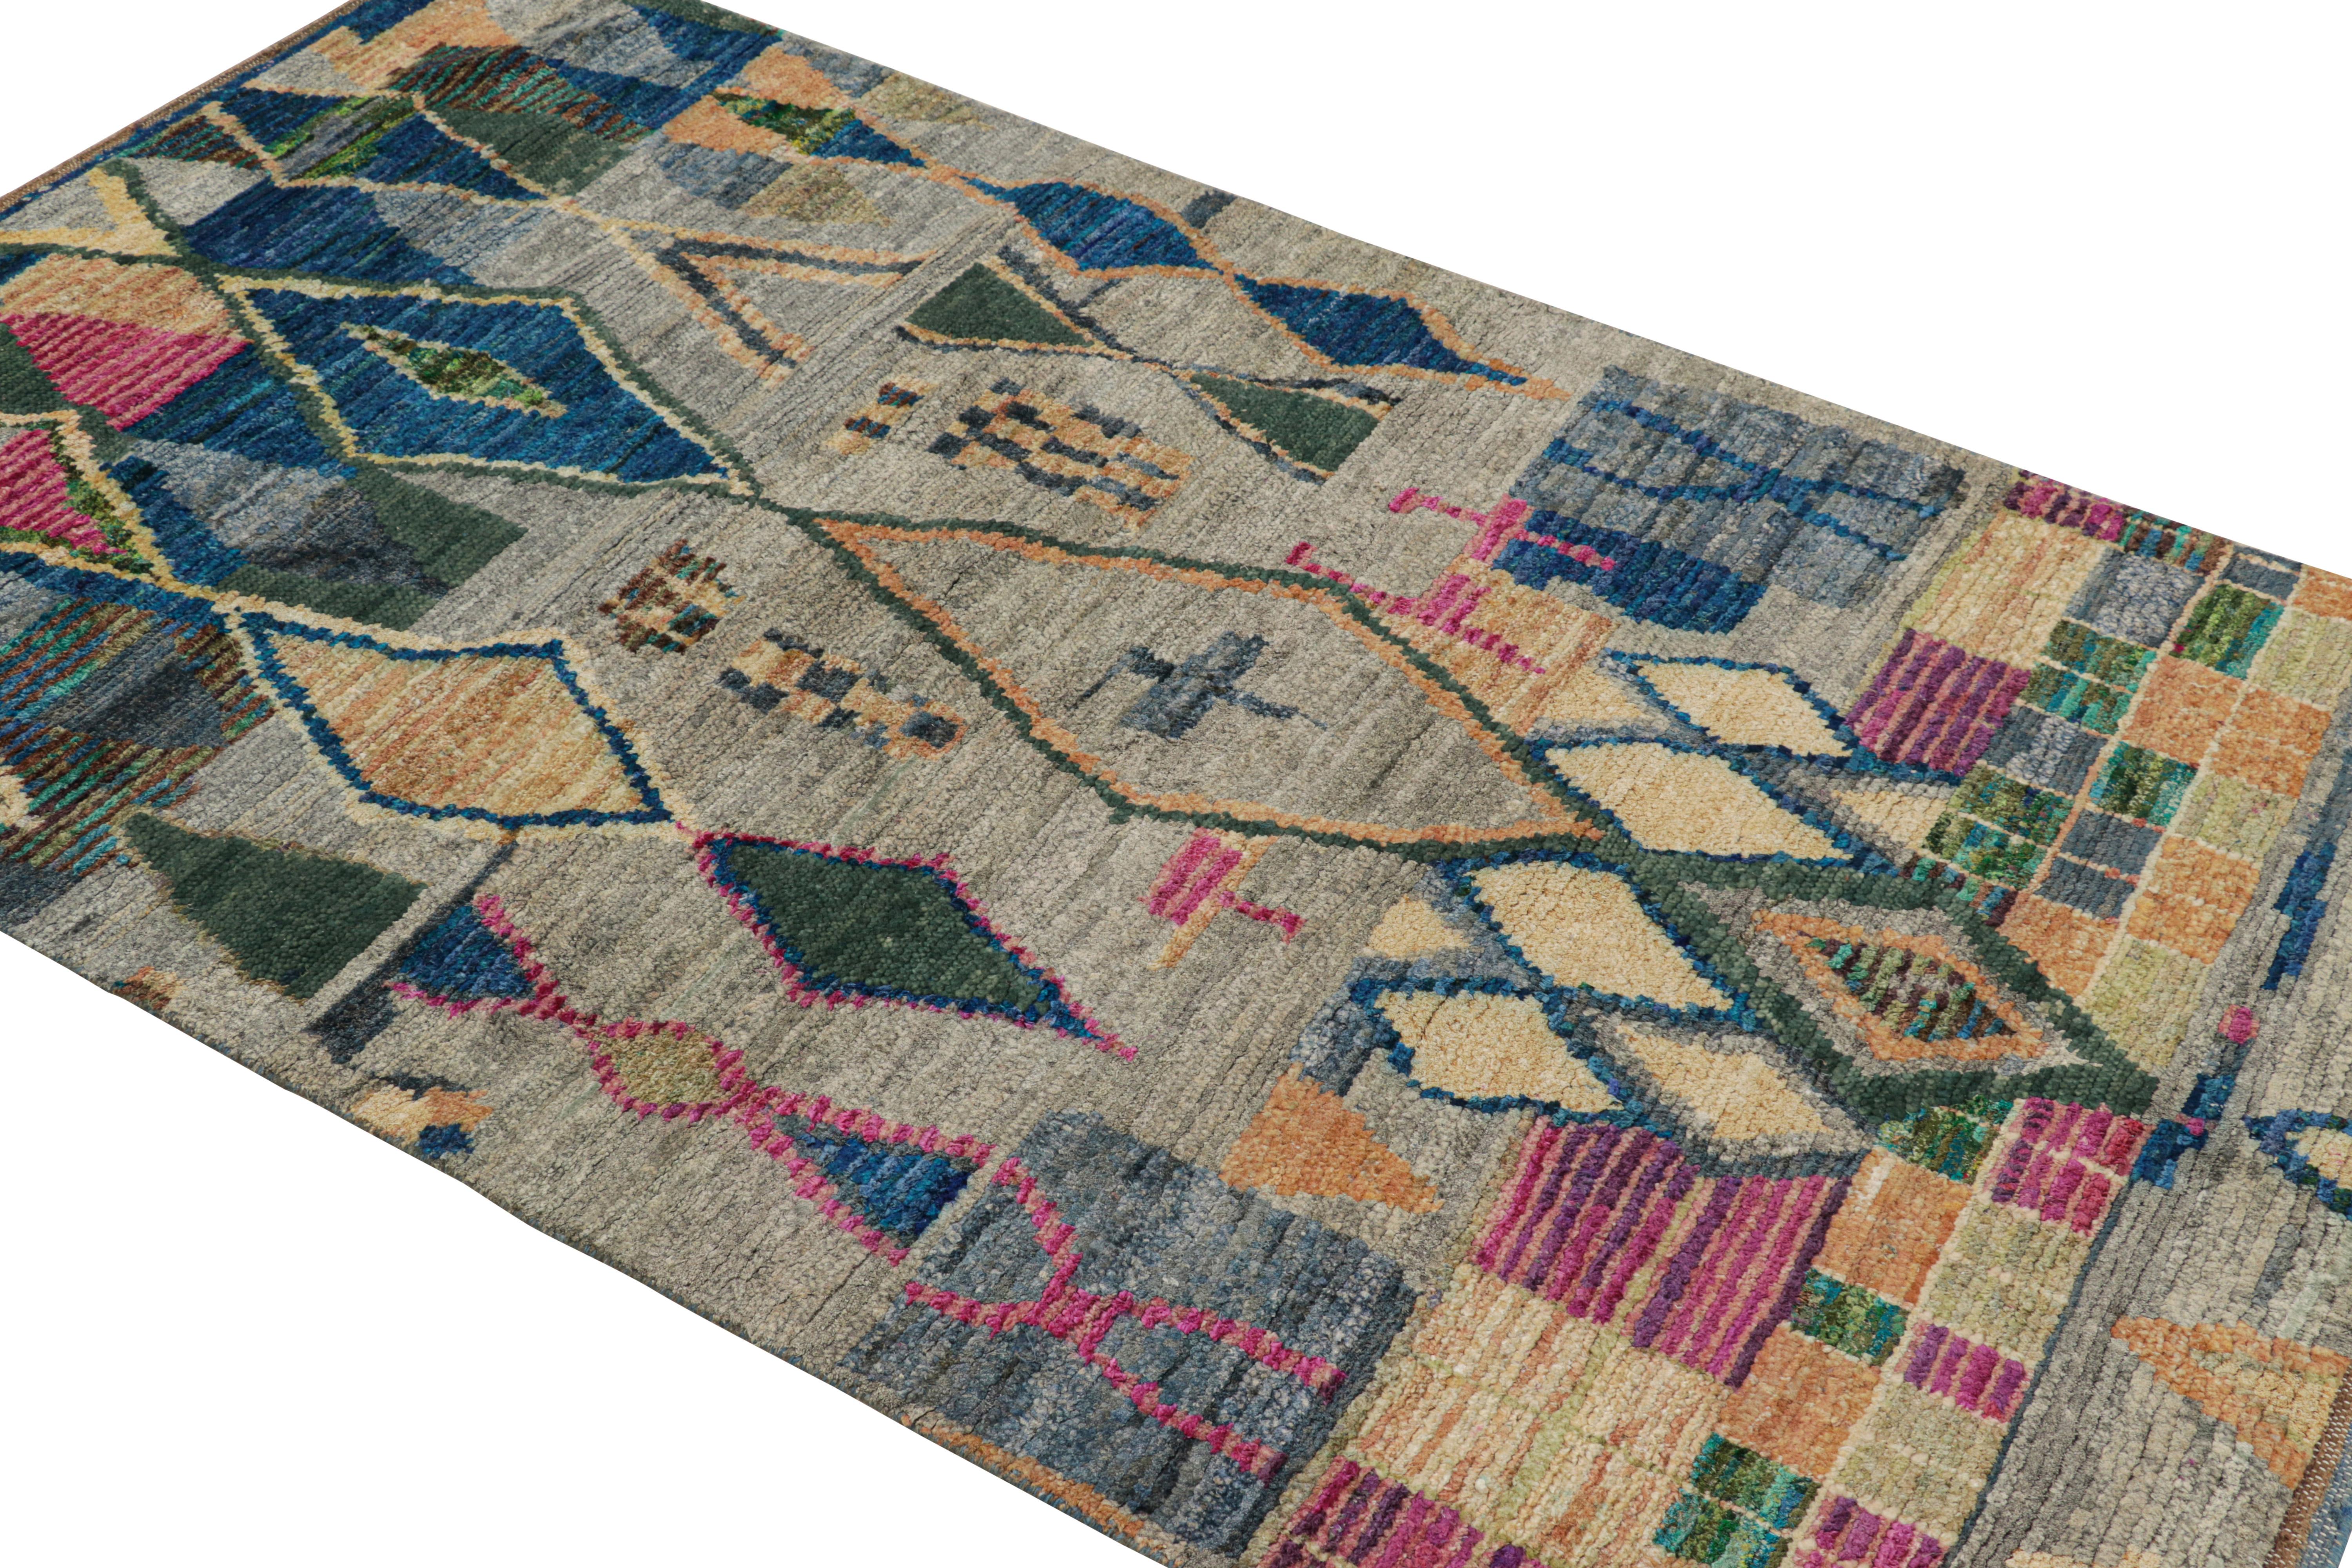 Indian Rug & Kilim’s Contemporary Moroccan Style Rug Polychromatic Geometric Patterns For Sale